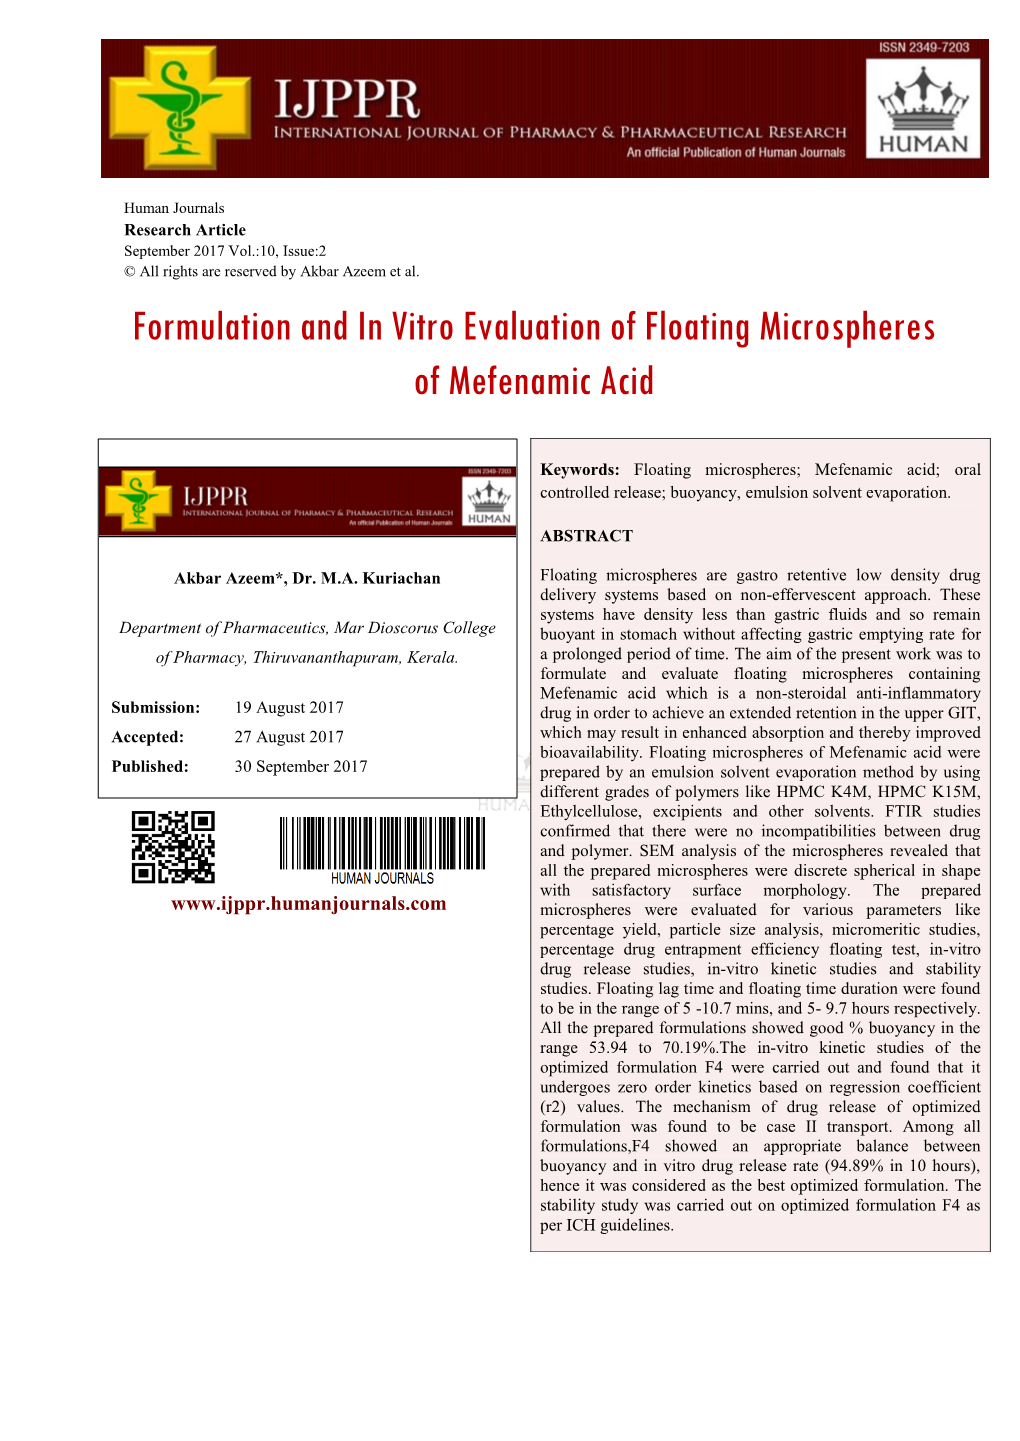 Formulation and in Vitro Evaluation of Floating Microspheres of Mefenamic Acid